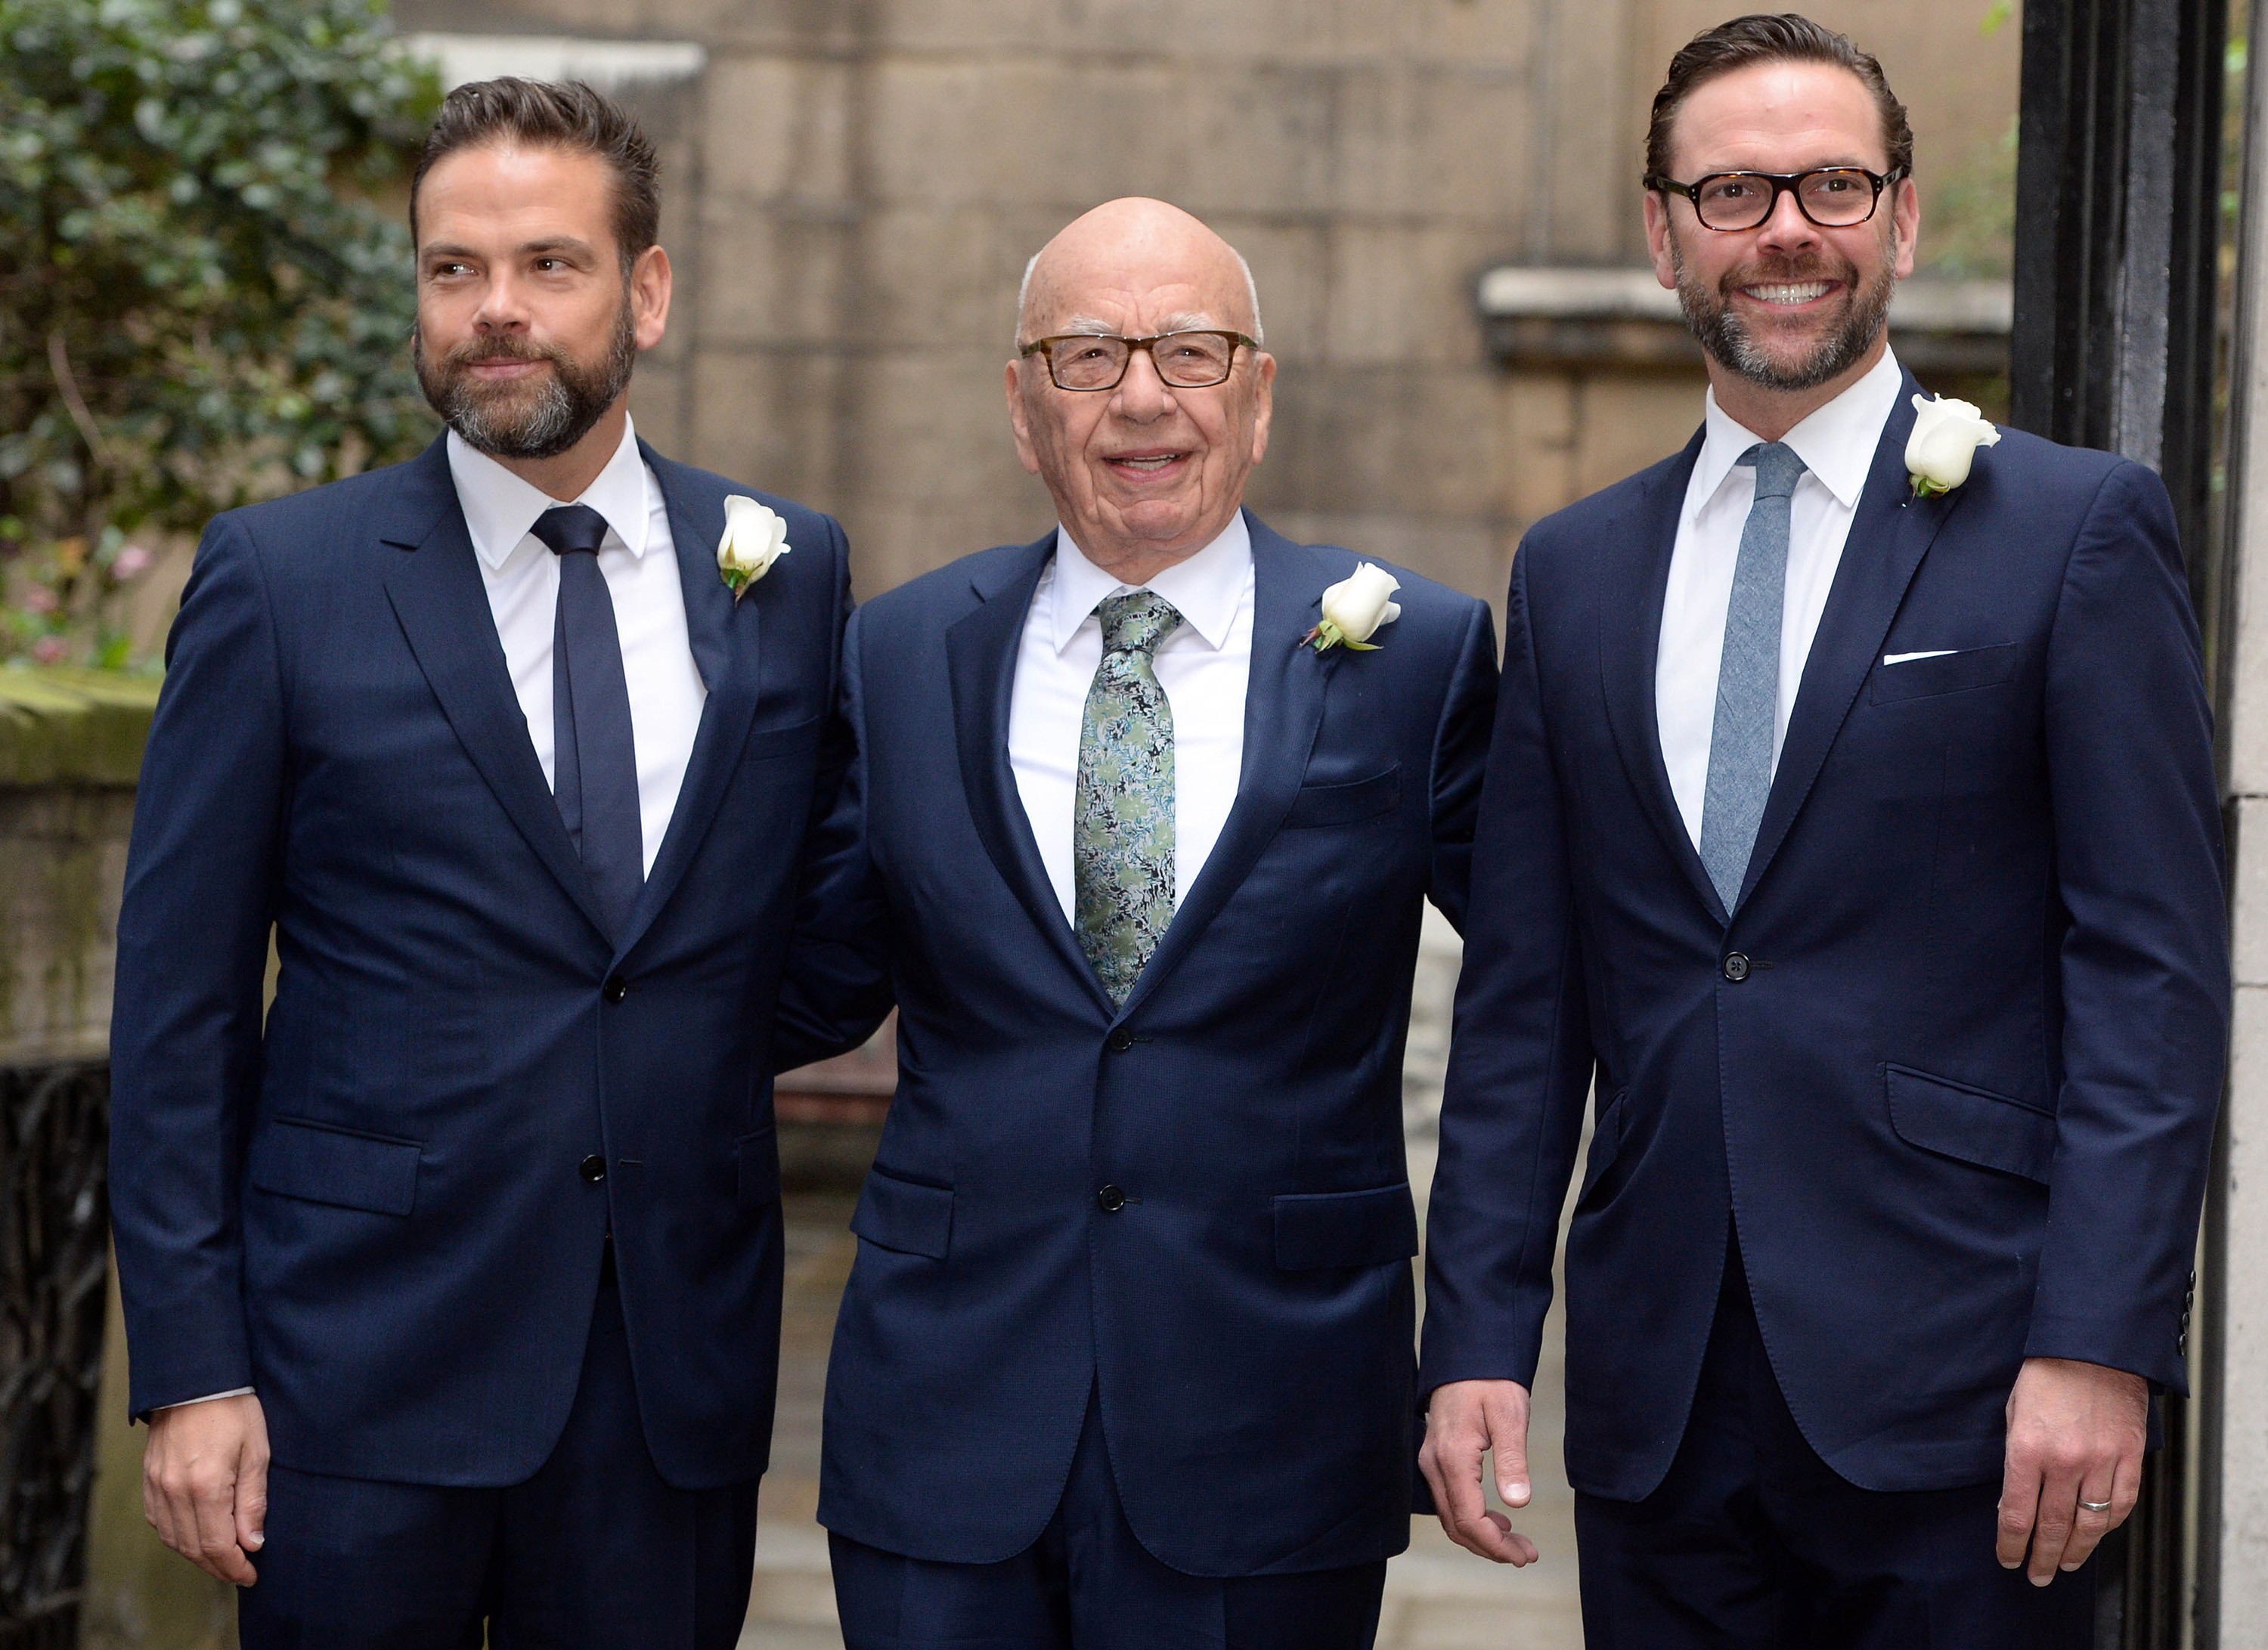 Fox CEO James Murdoch, right, with his father Rupert and brother Lachlan in 2016. James has not been shy about expressing his support for Disney over Comcast. Photo: i-Images/Zuma Press/TNS